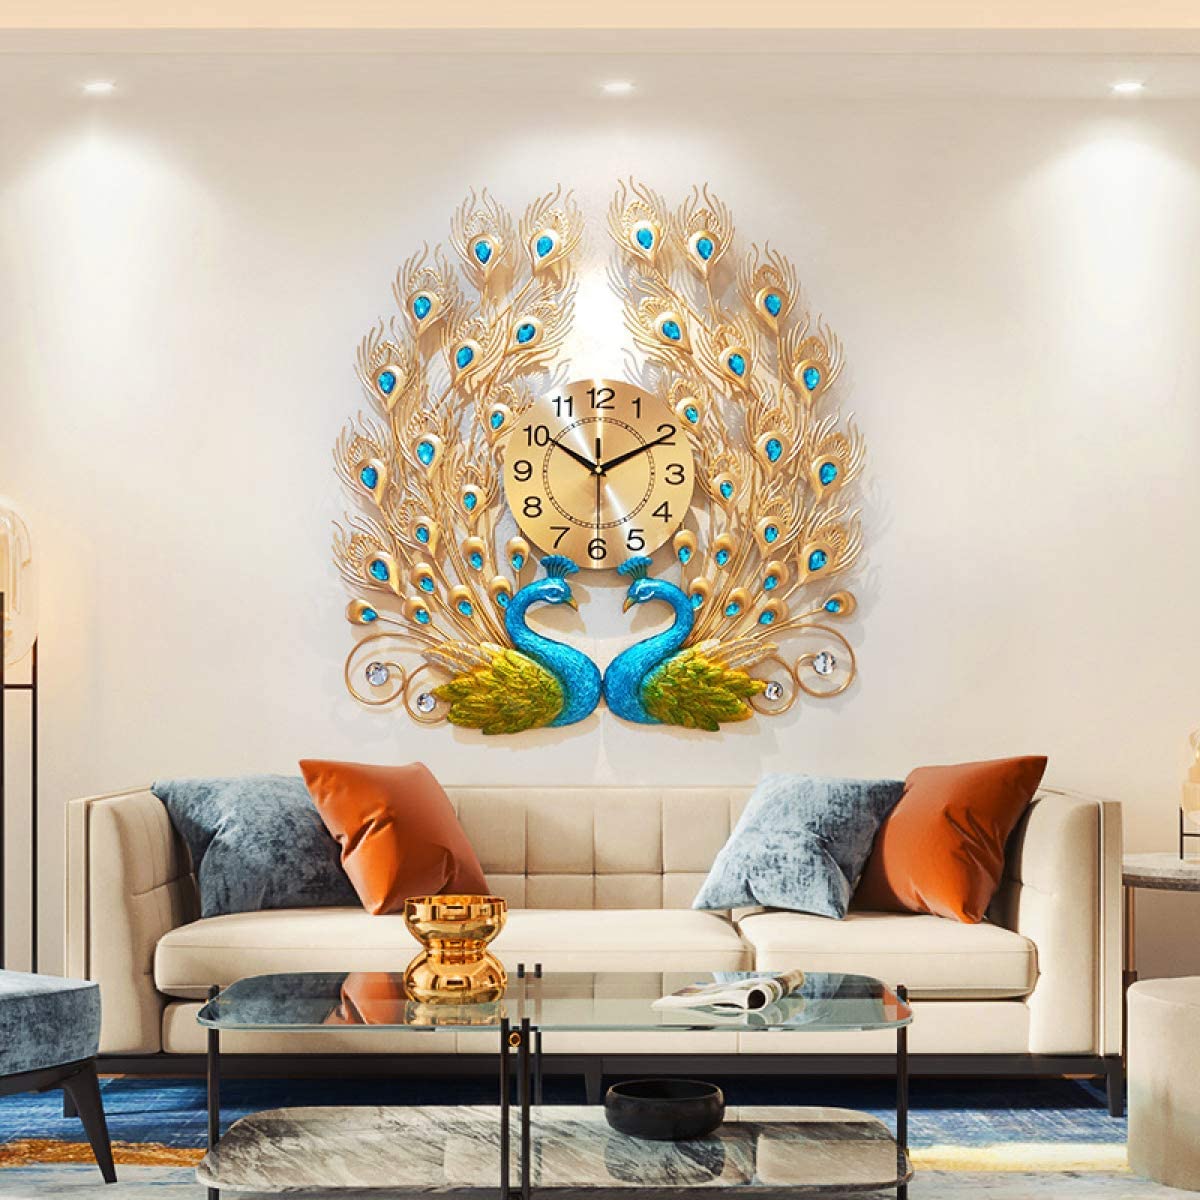 Wall Clock. 2 +110 Unique Living Room Furniture Pieces That Amaze Everyone - 7